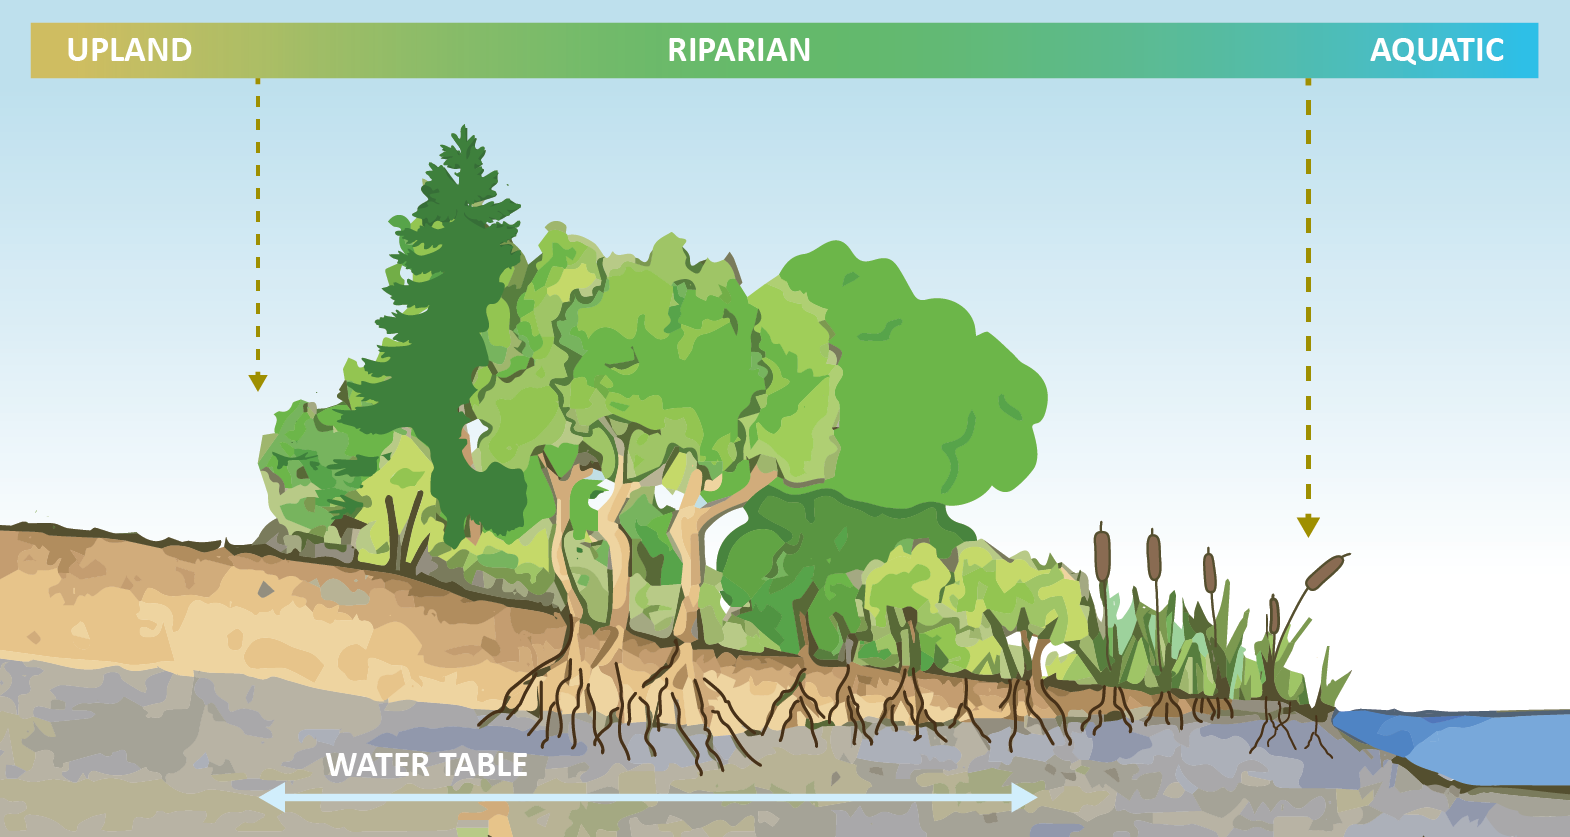 Shoreline showing transition from aquatic plants to riparian plants to upland areas.